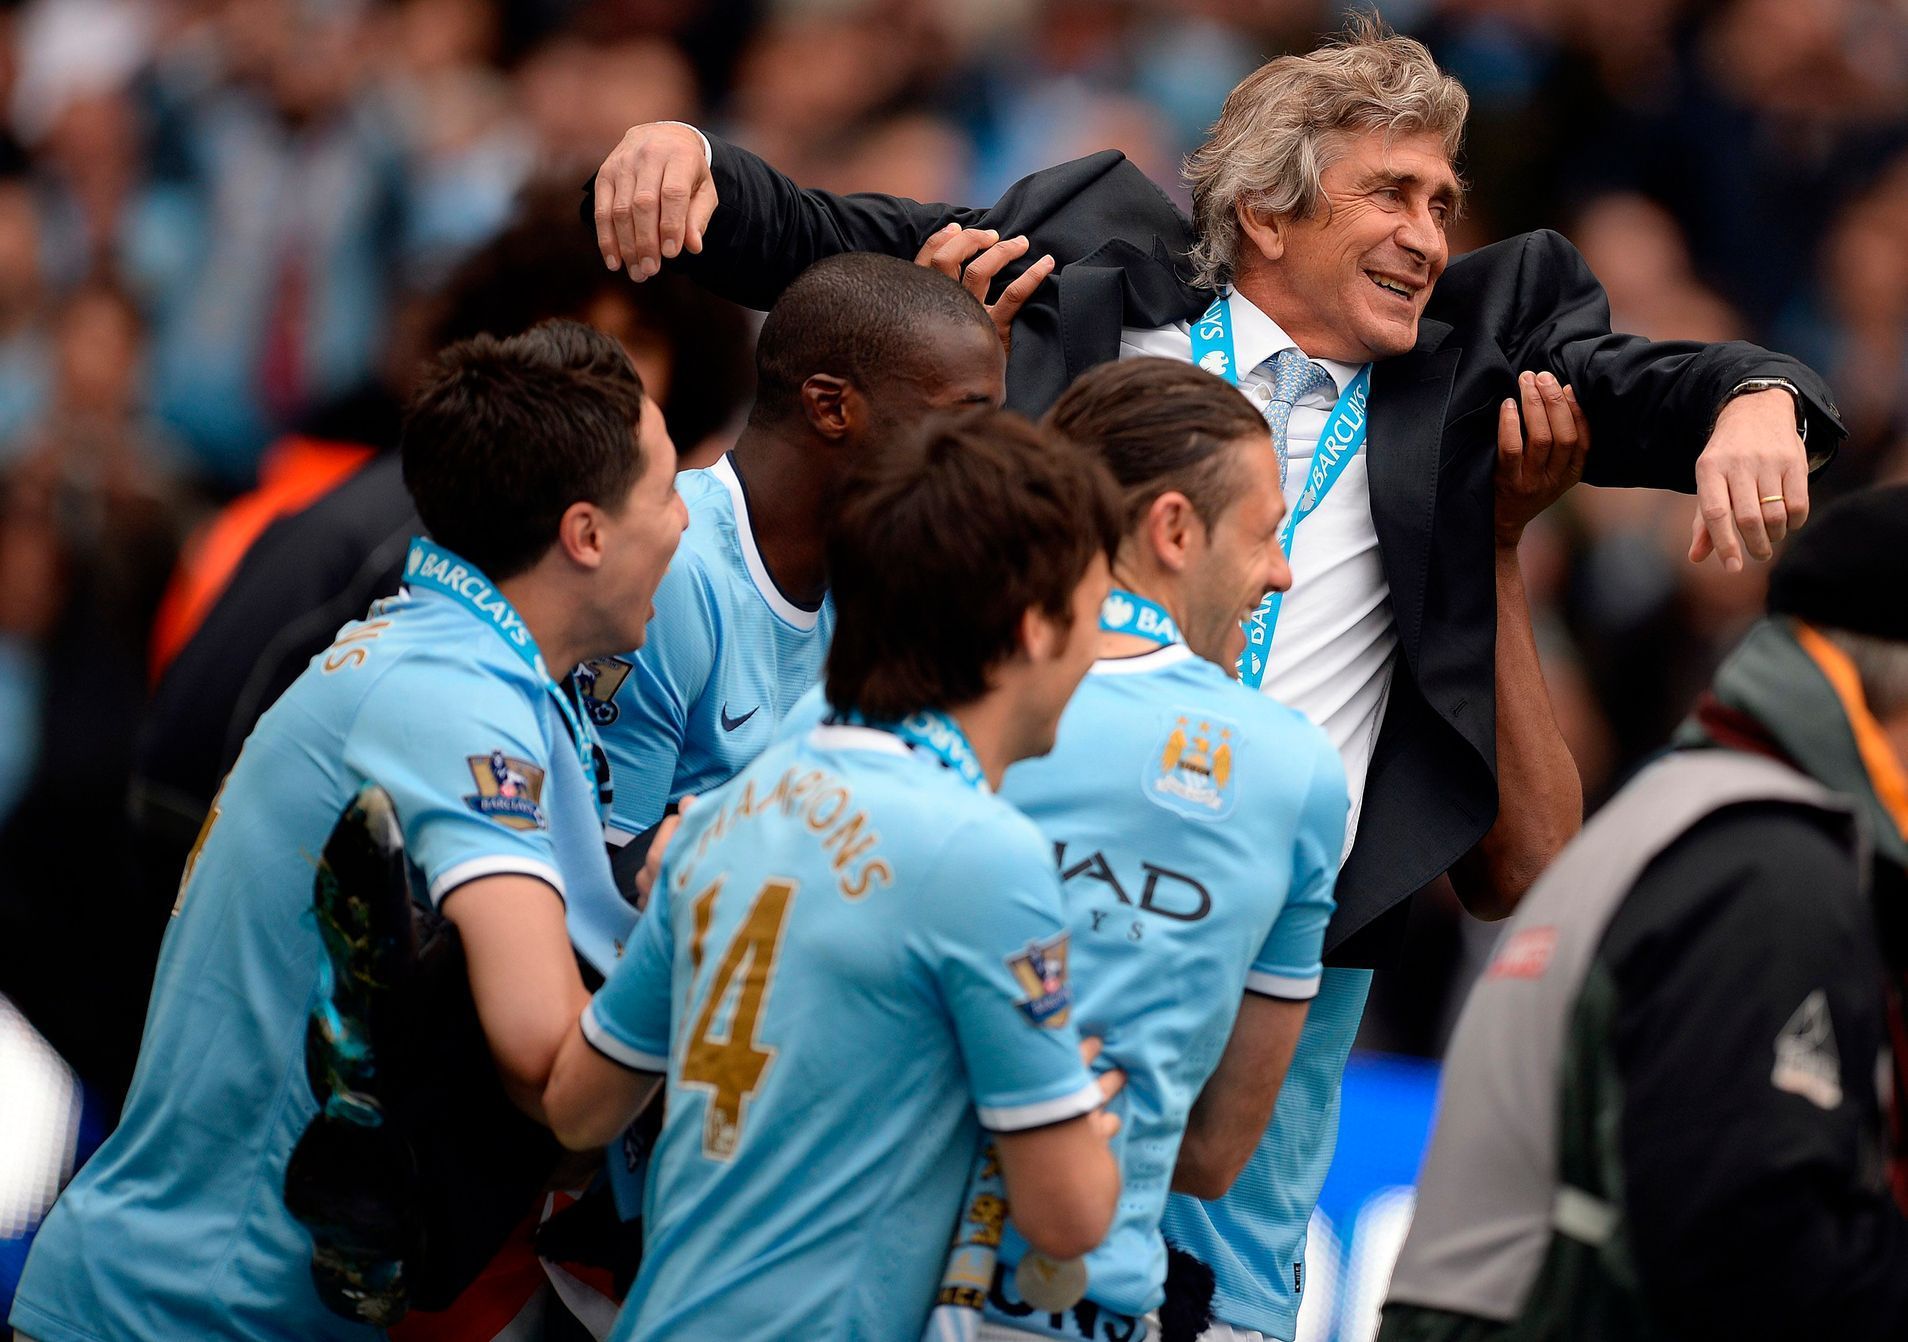 Manchester City's manager Pellegrini is carried by players as they celebrate winning the league after their English Premier League soccer match against West Ham United at the Etihad Stadium in Manches